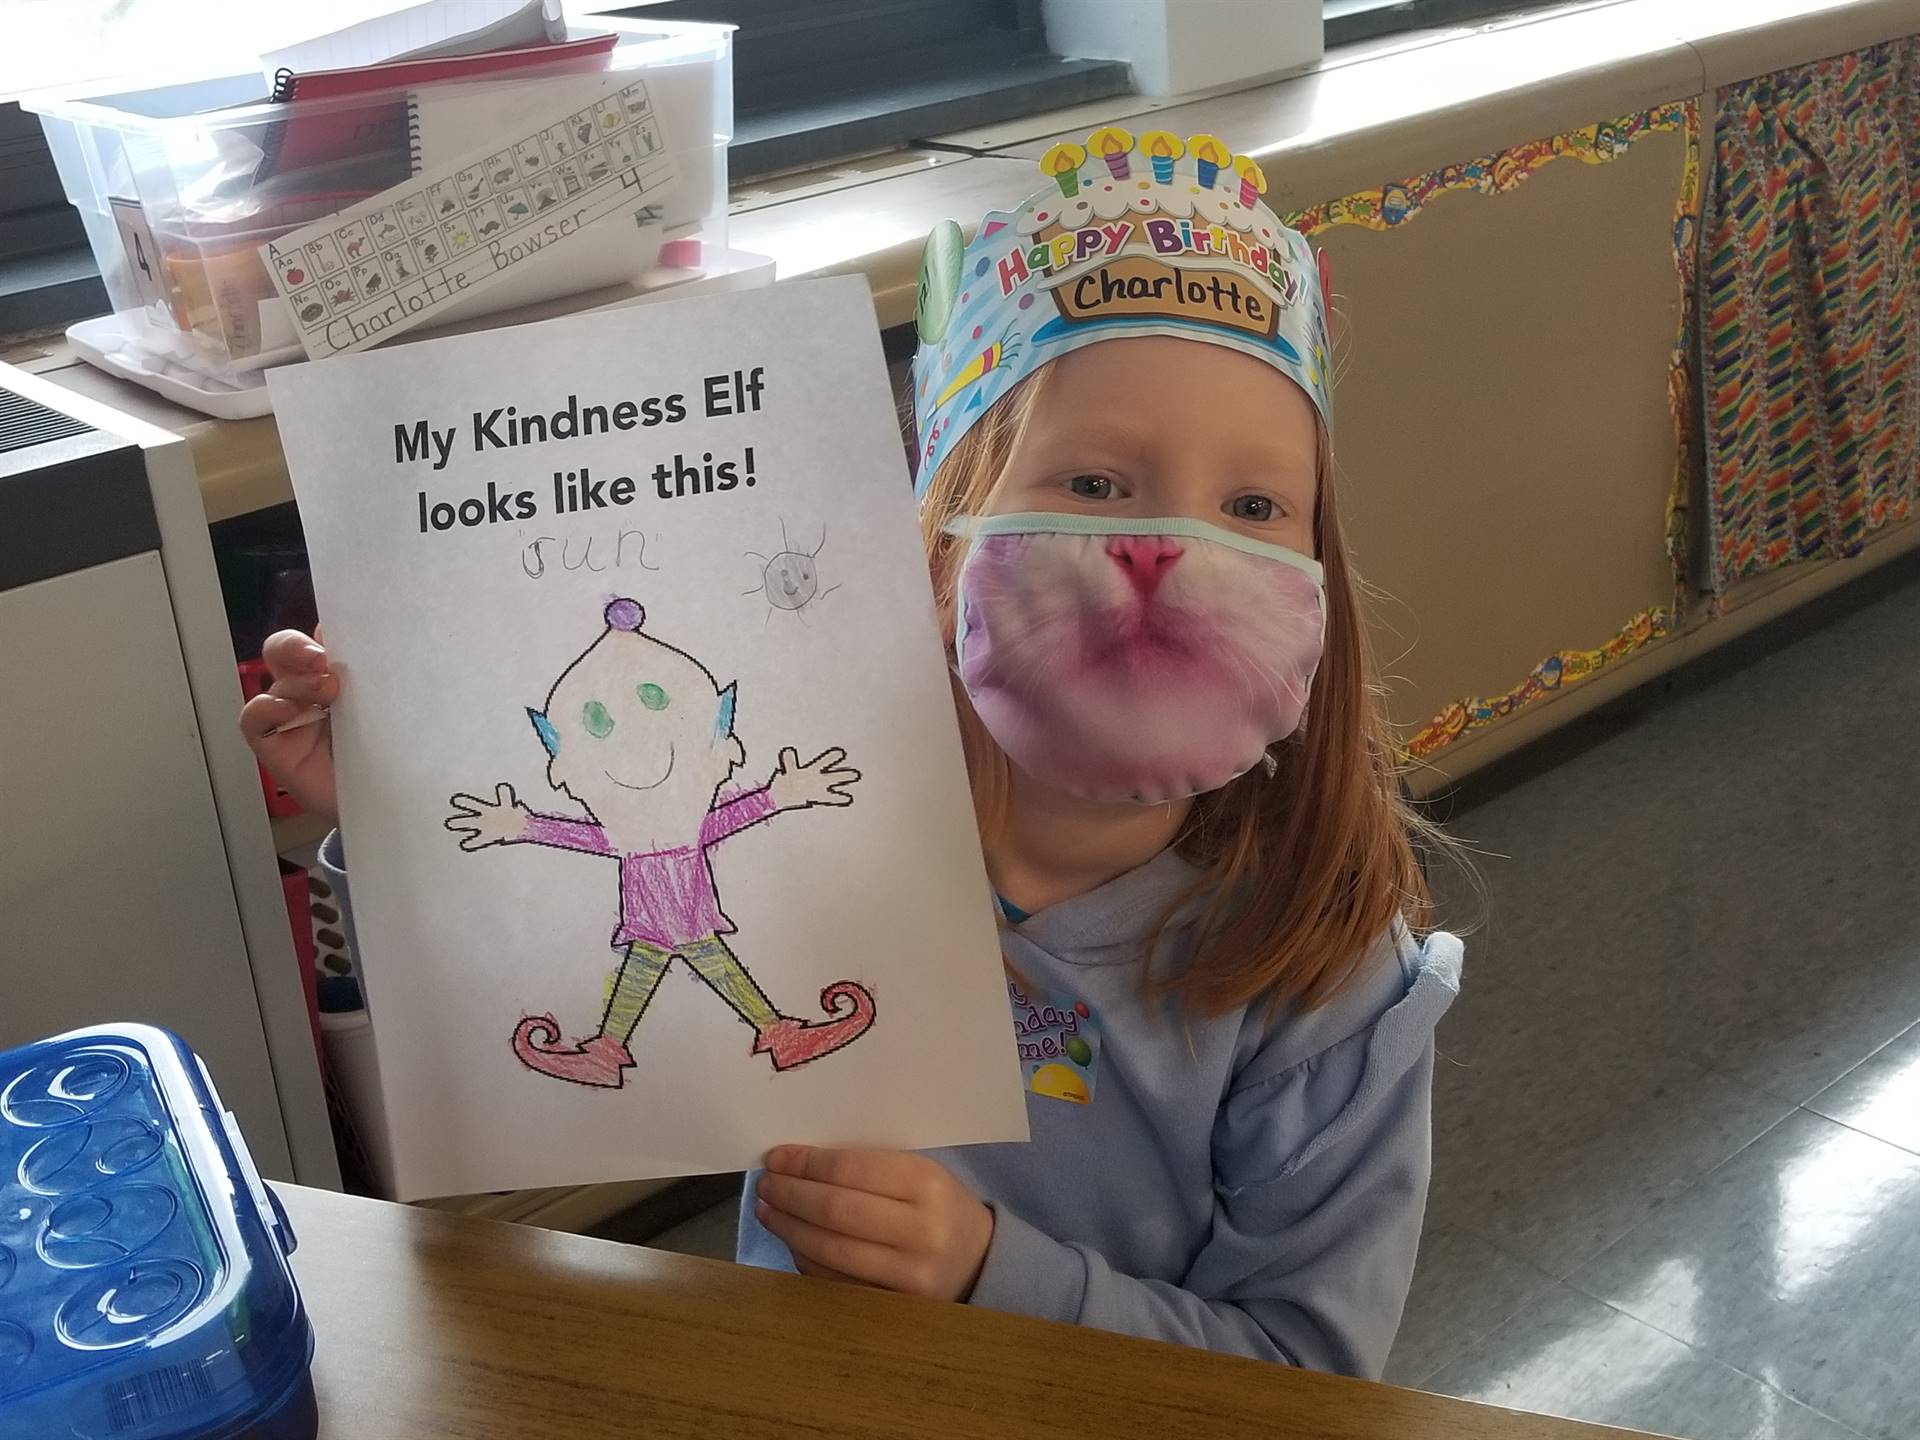 students shows a colored page of the kindness elf